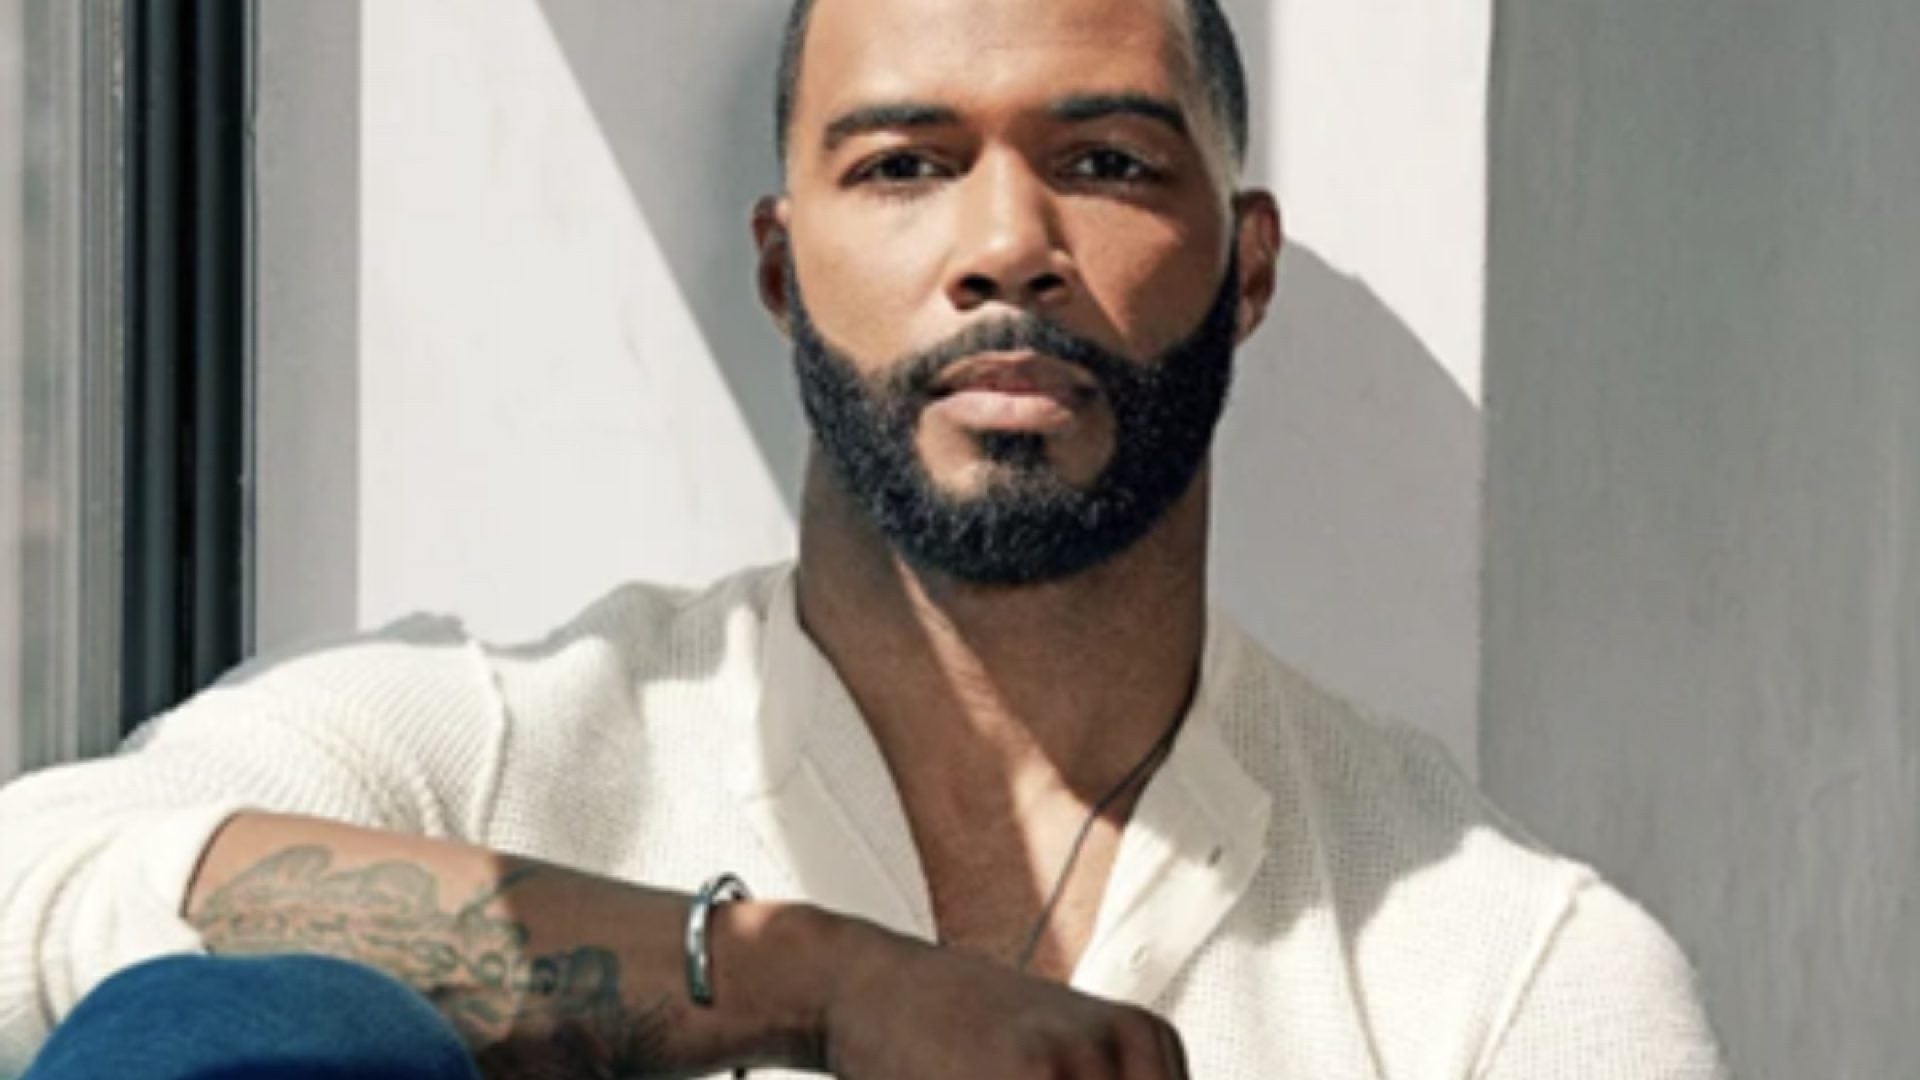 Omari Hardwick On Continuing To Hone His Craft: “That's What Inspires Me, Just The Opportunity To Grow.”